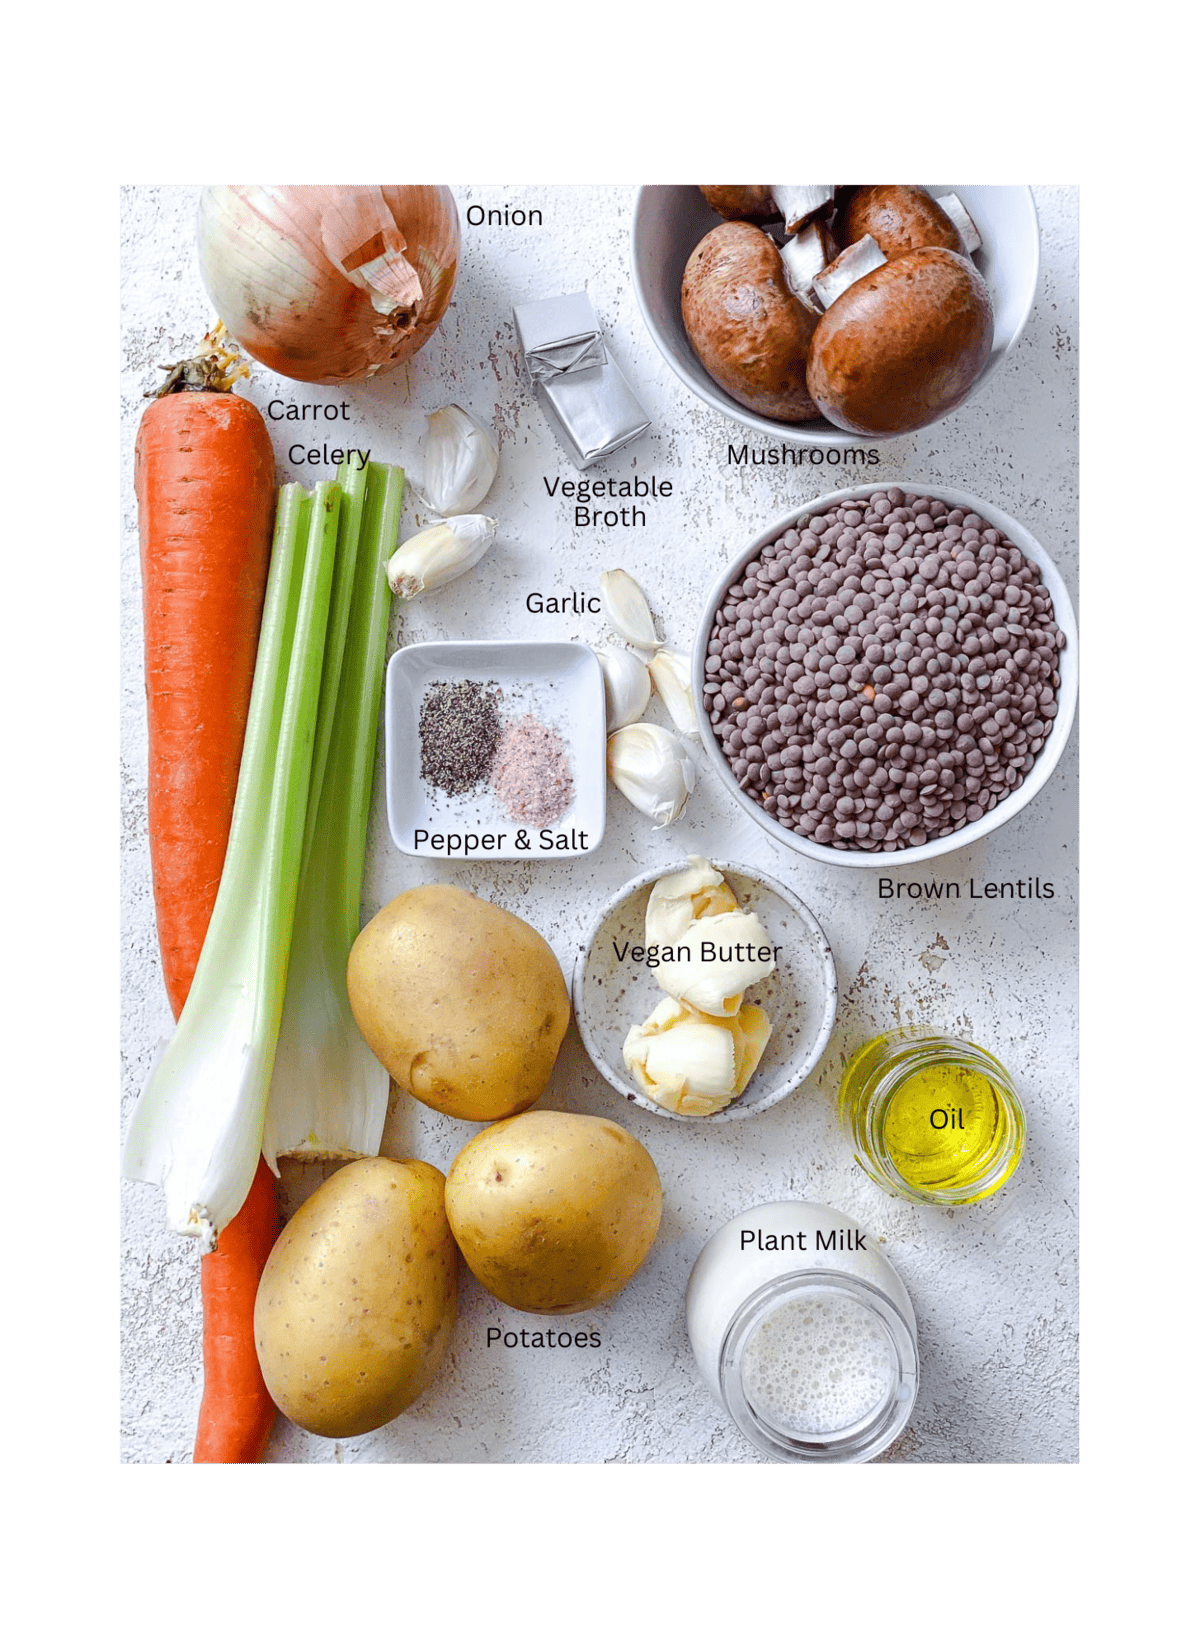 ingredients for Vegan Lentil Shepherd's Pie measured out against a white surface